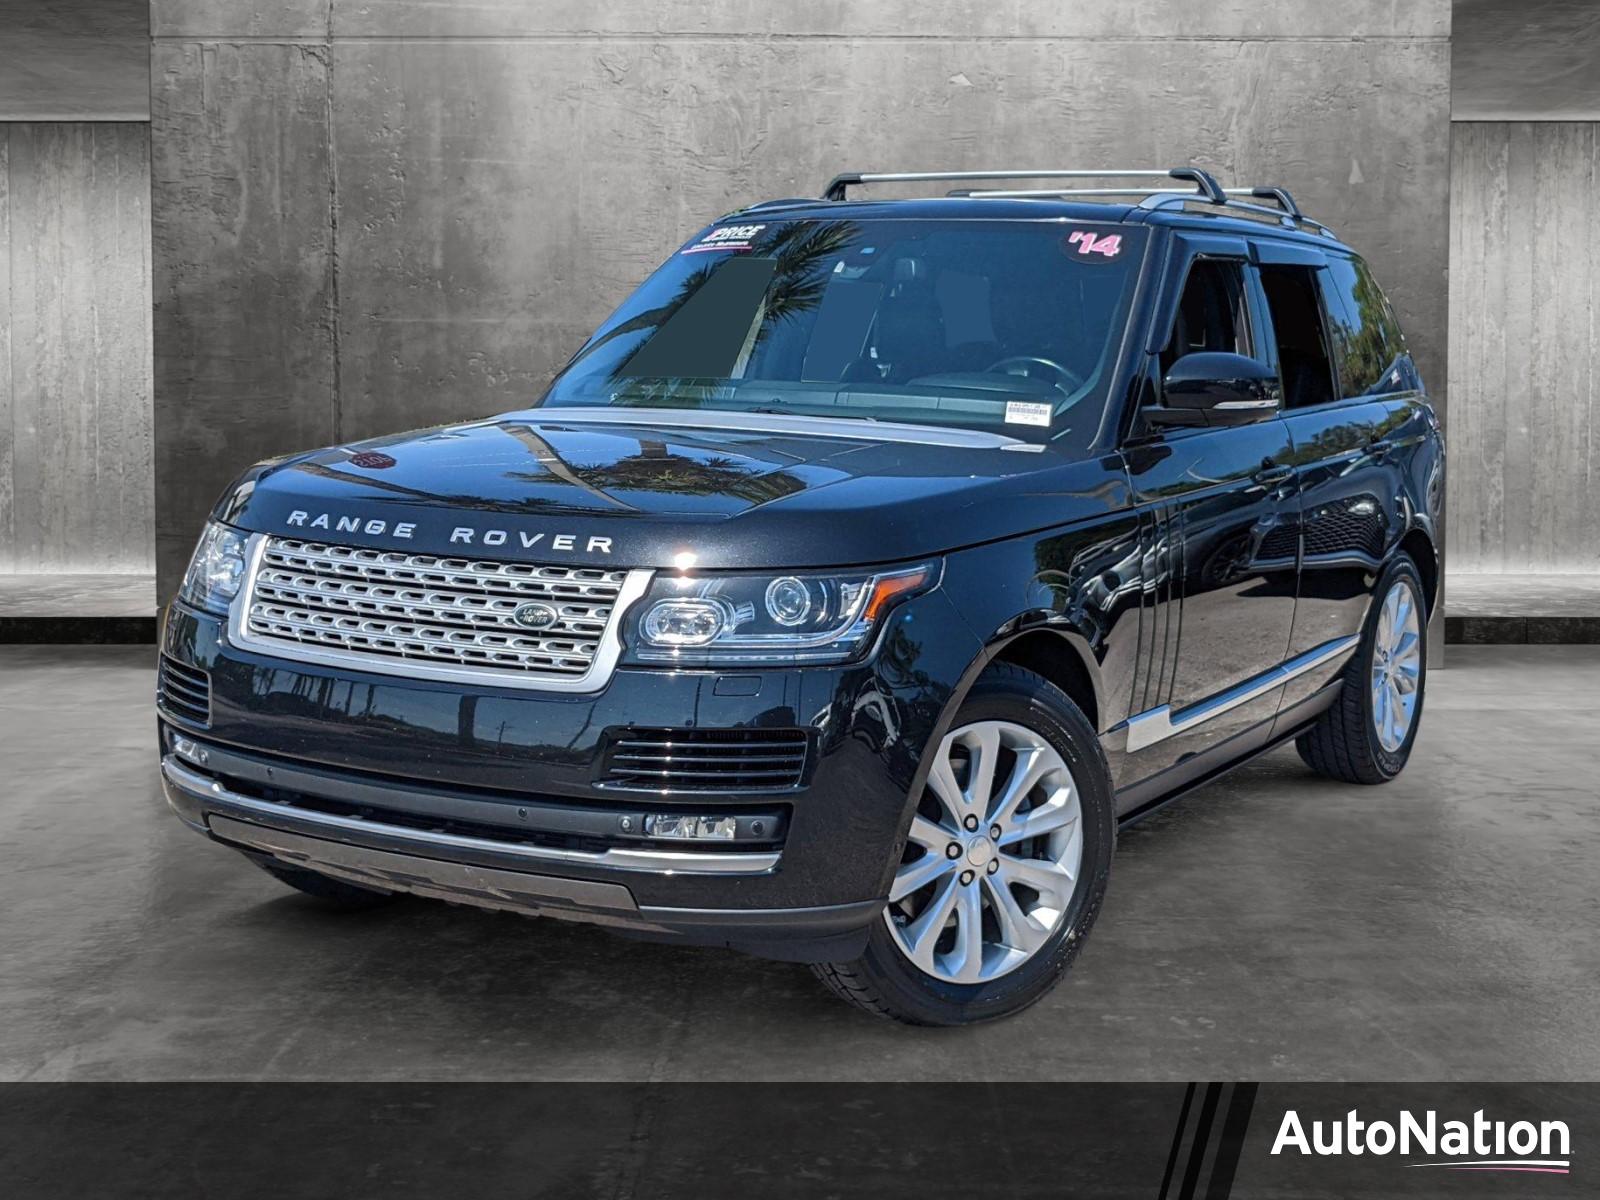 2014 Land Rover Range Rover Vehicle Photo in Tampa, FL 33614